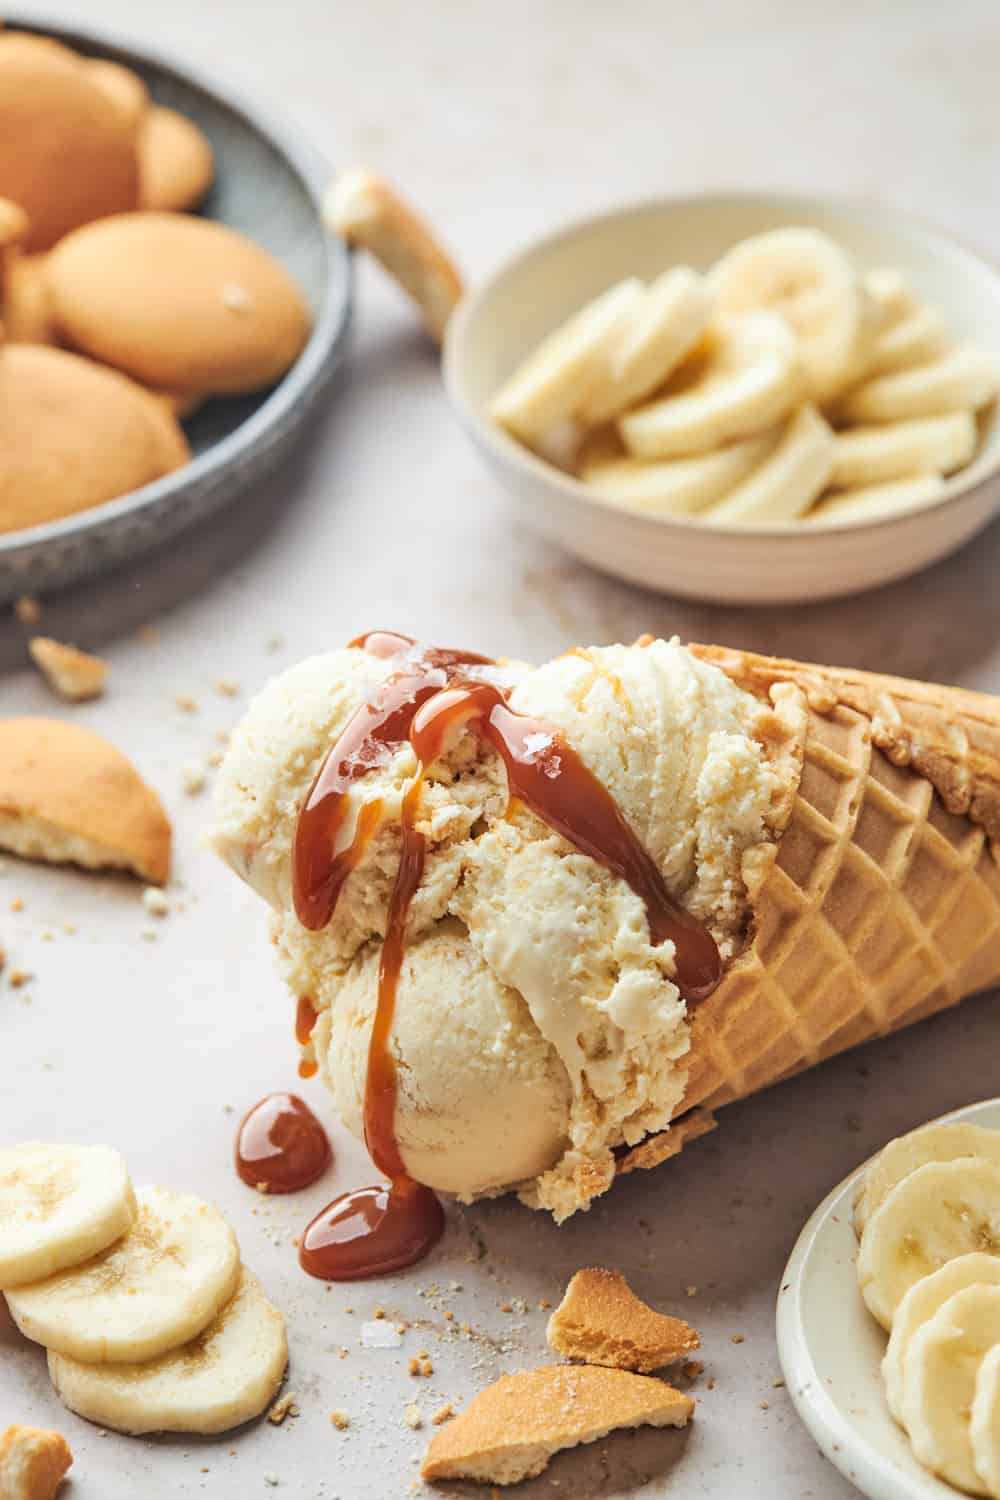 Caramel sauce drizzled over banana pudding ice cream in a waffle cone